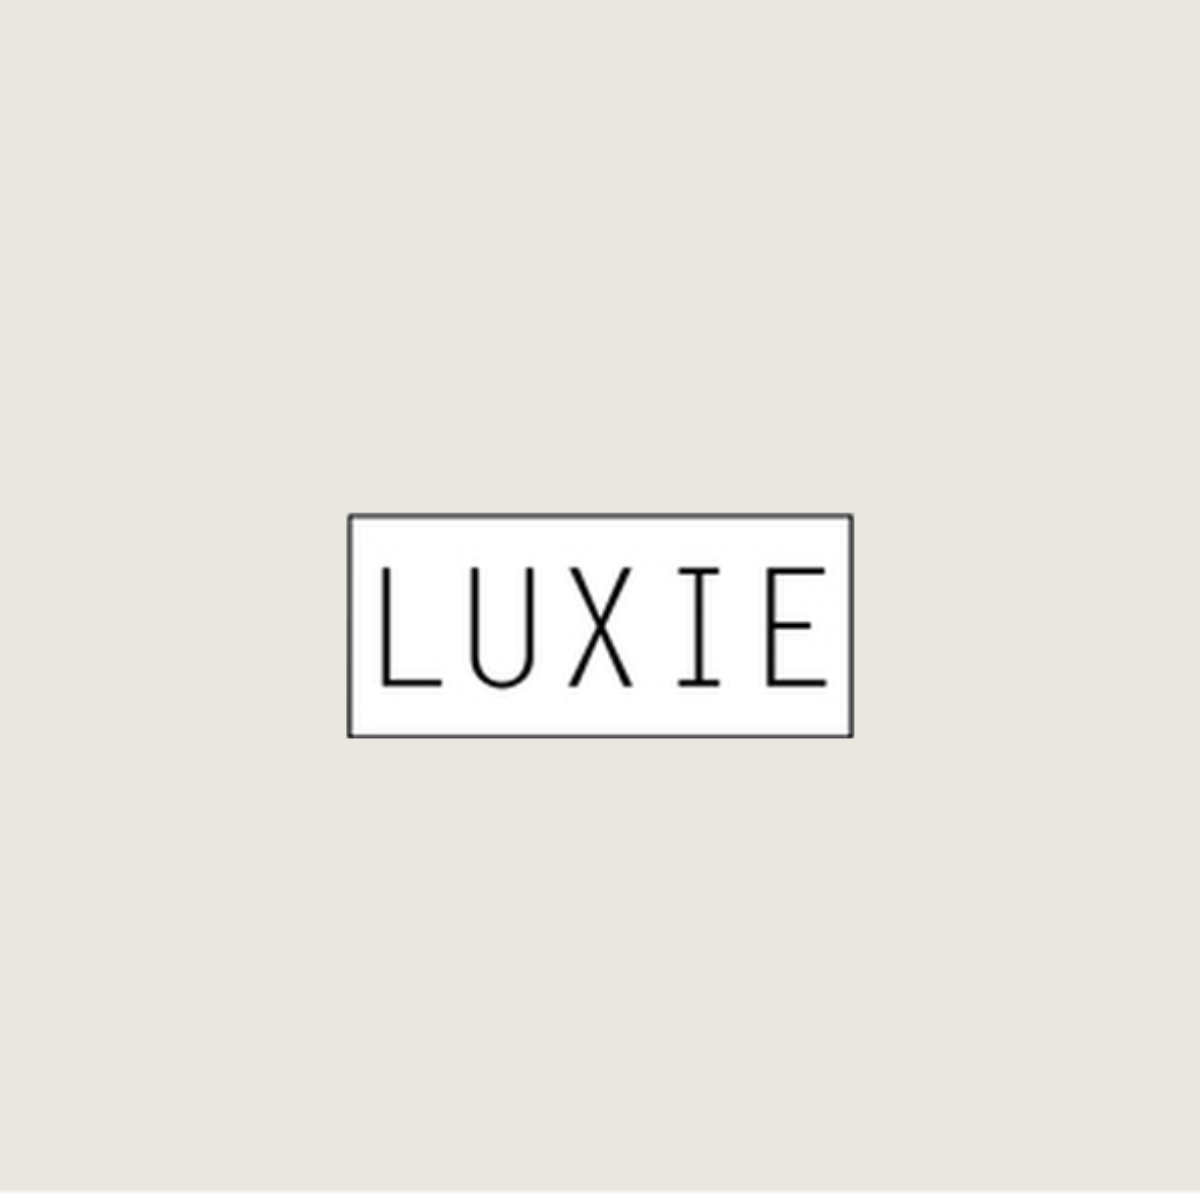 Luxie Beauty